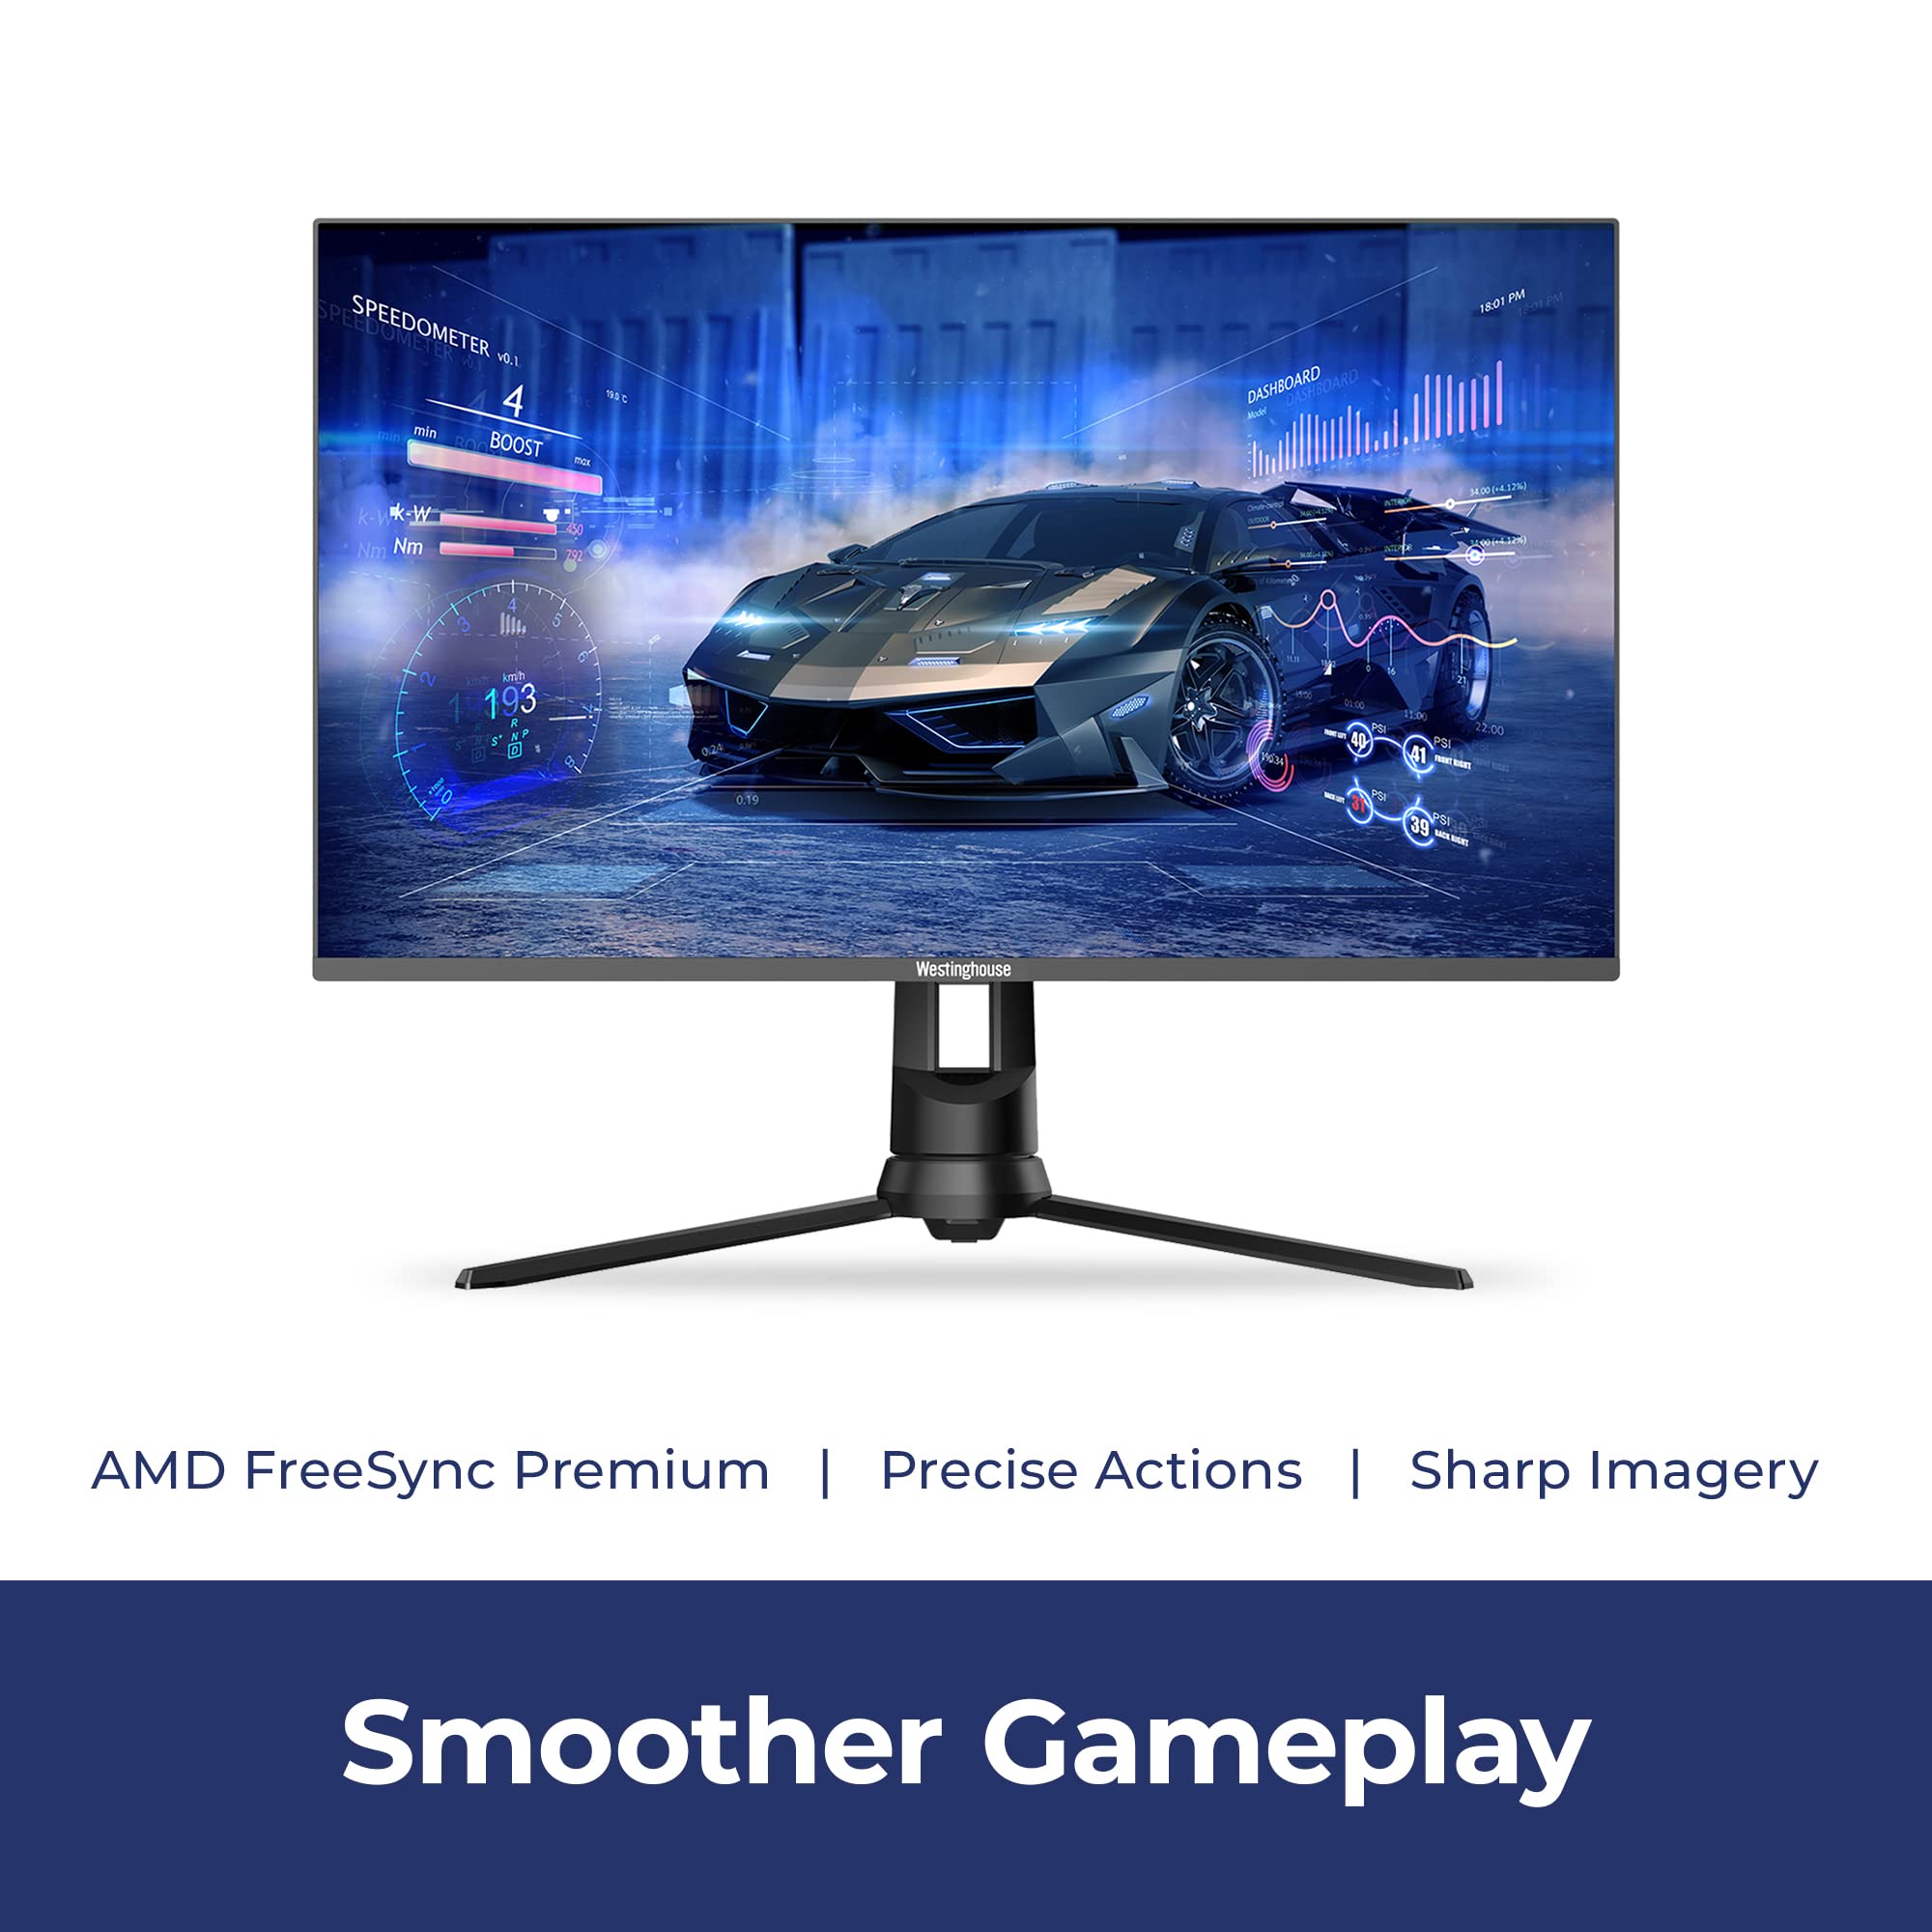 Westinghouse 32 Inch Gaming Monitor with 144Hz Refresh Rate, 2560 x 1440P Quad HD LED Flat VA Gaming Monitor Supported by AMD FreeSync Premium, Computer Monitor with RGB Lights, 16:9 Aspect Ratio